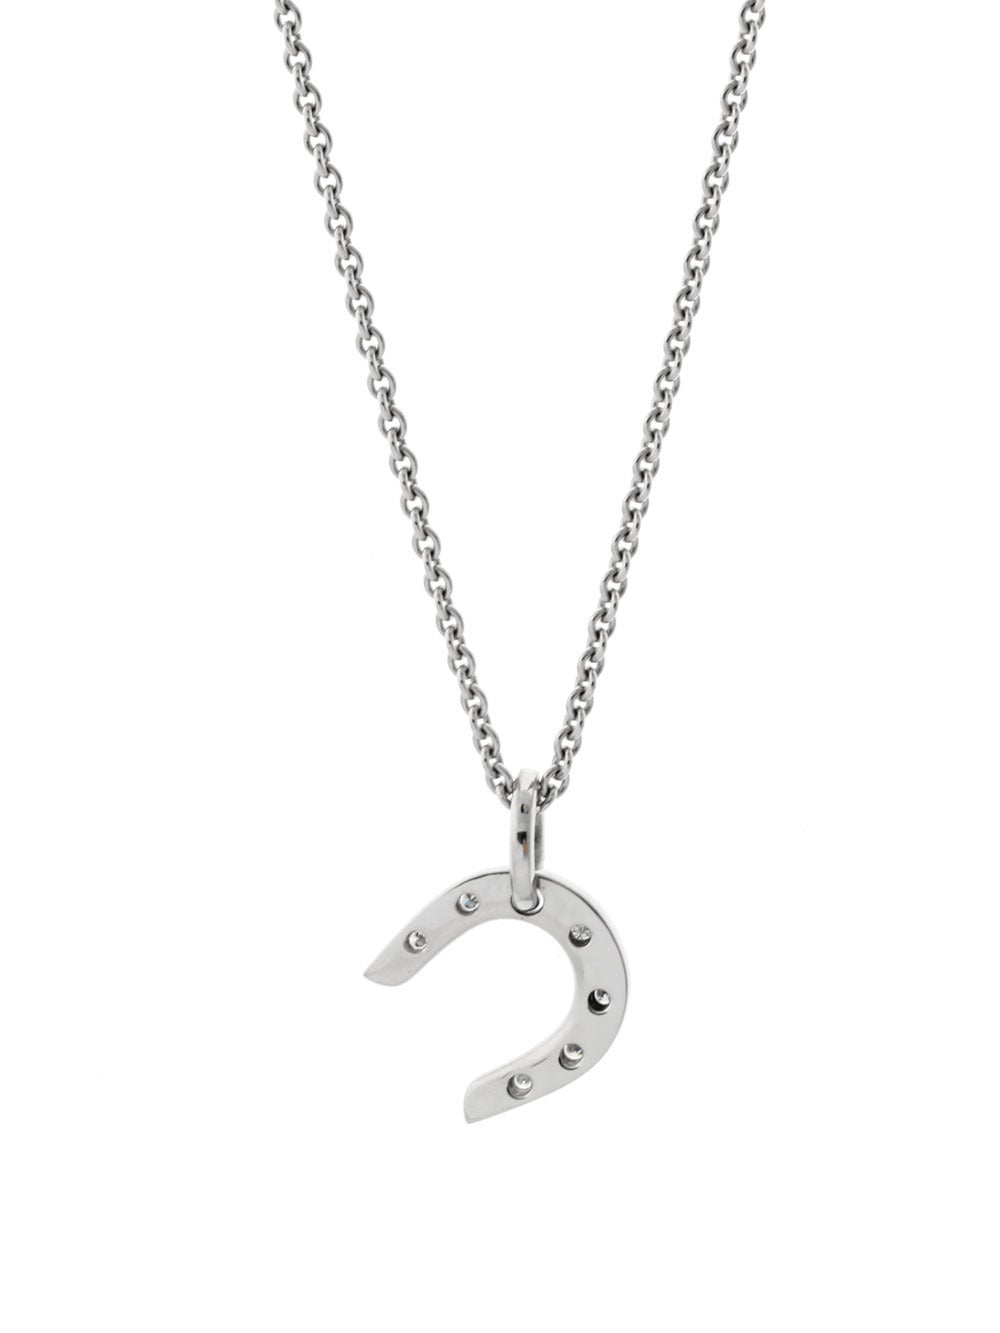 Get lucky with this iconic necklace by Hermes, crafted in 18k white gold and featuring 6 Vvs1 E-F Color Round Brilliant Cut Diamonds. The pendant measures 14mm wide (.55″ Inches) by 21mm in length (.82″ Inches) with a necklace measuring 15